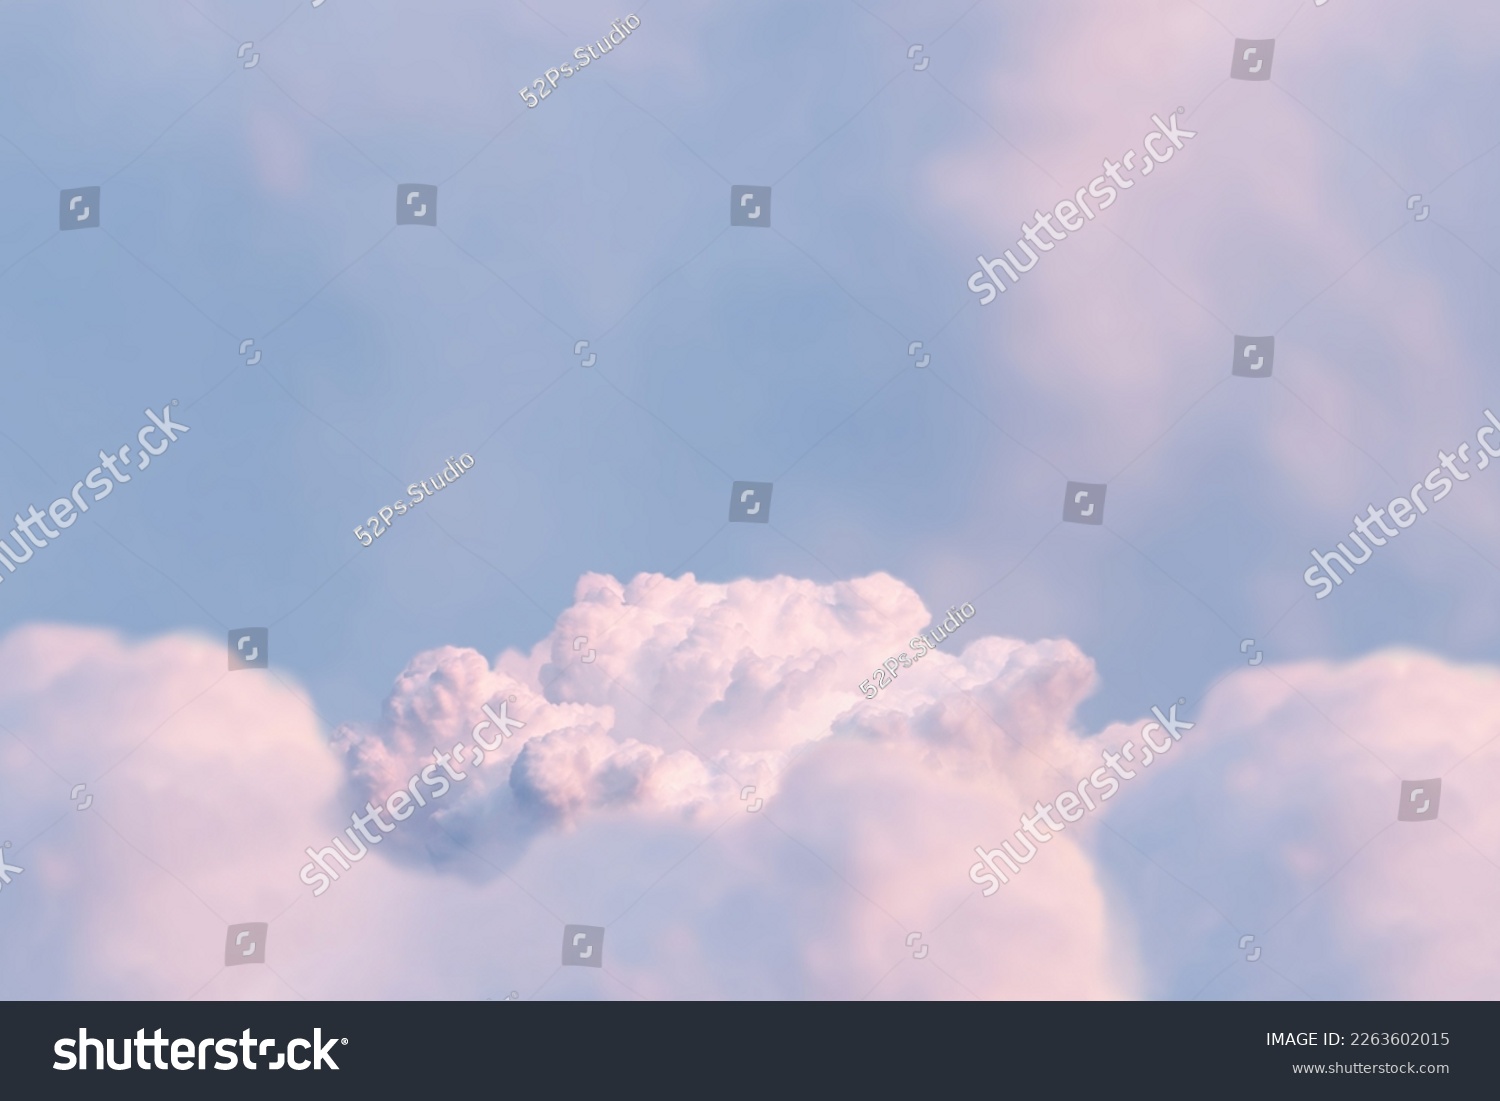 Surreal cloud podium outdoor on blue sky pink pastel soft fluffy clouds with empty space.Beauty cosmetic product placement pedestal present promotion minimal display,summer paradise dreamy concept. #2263602015